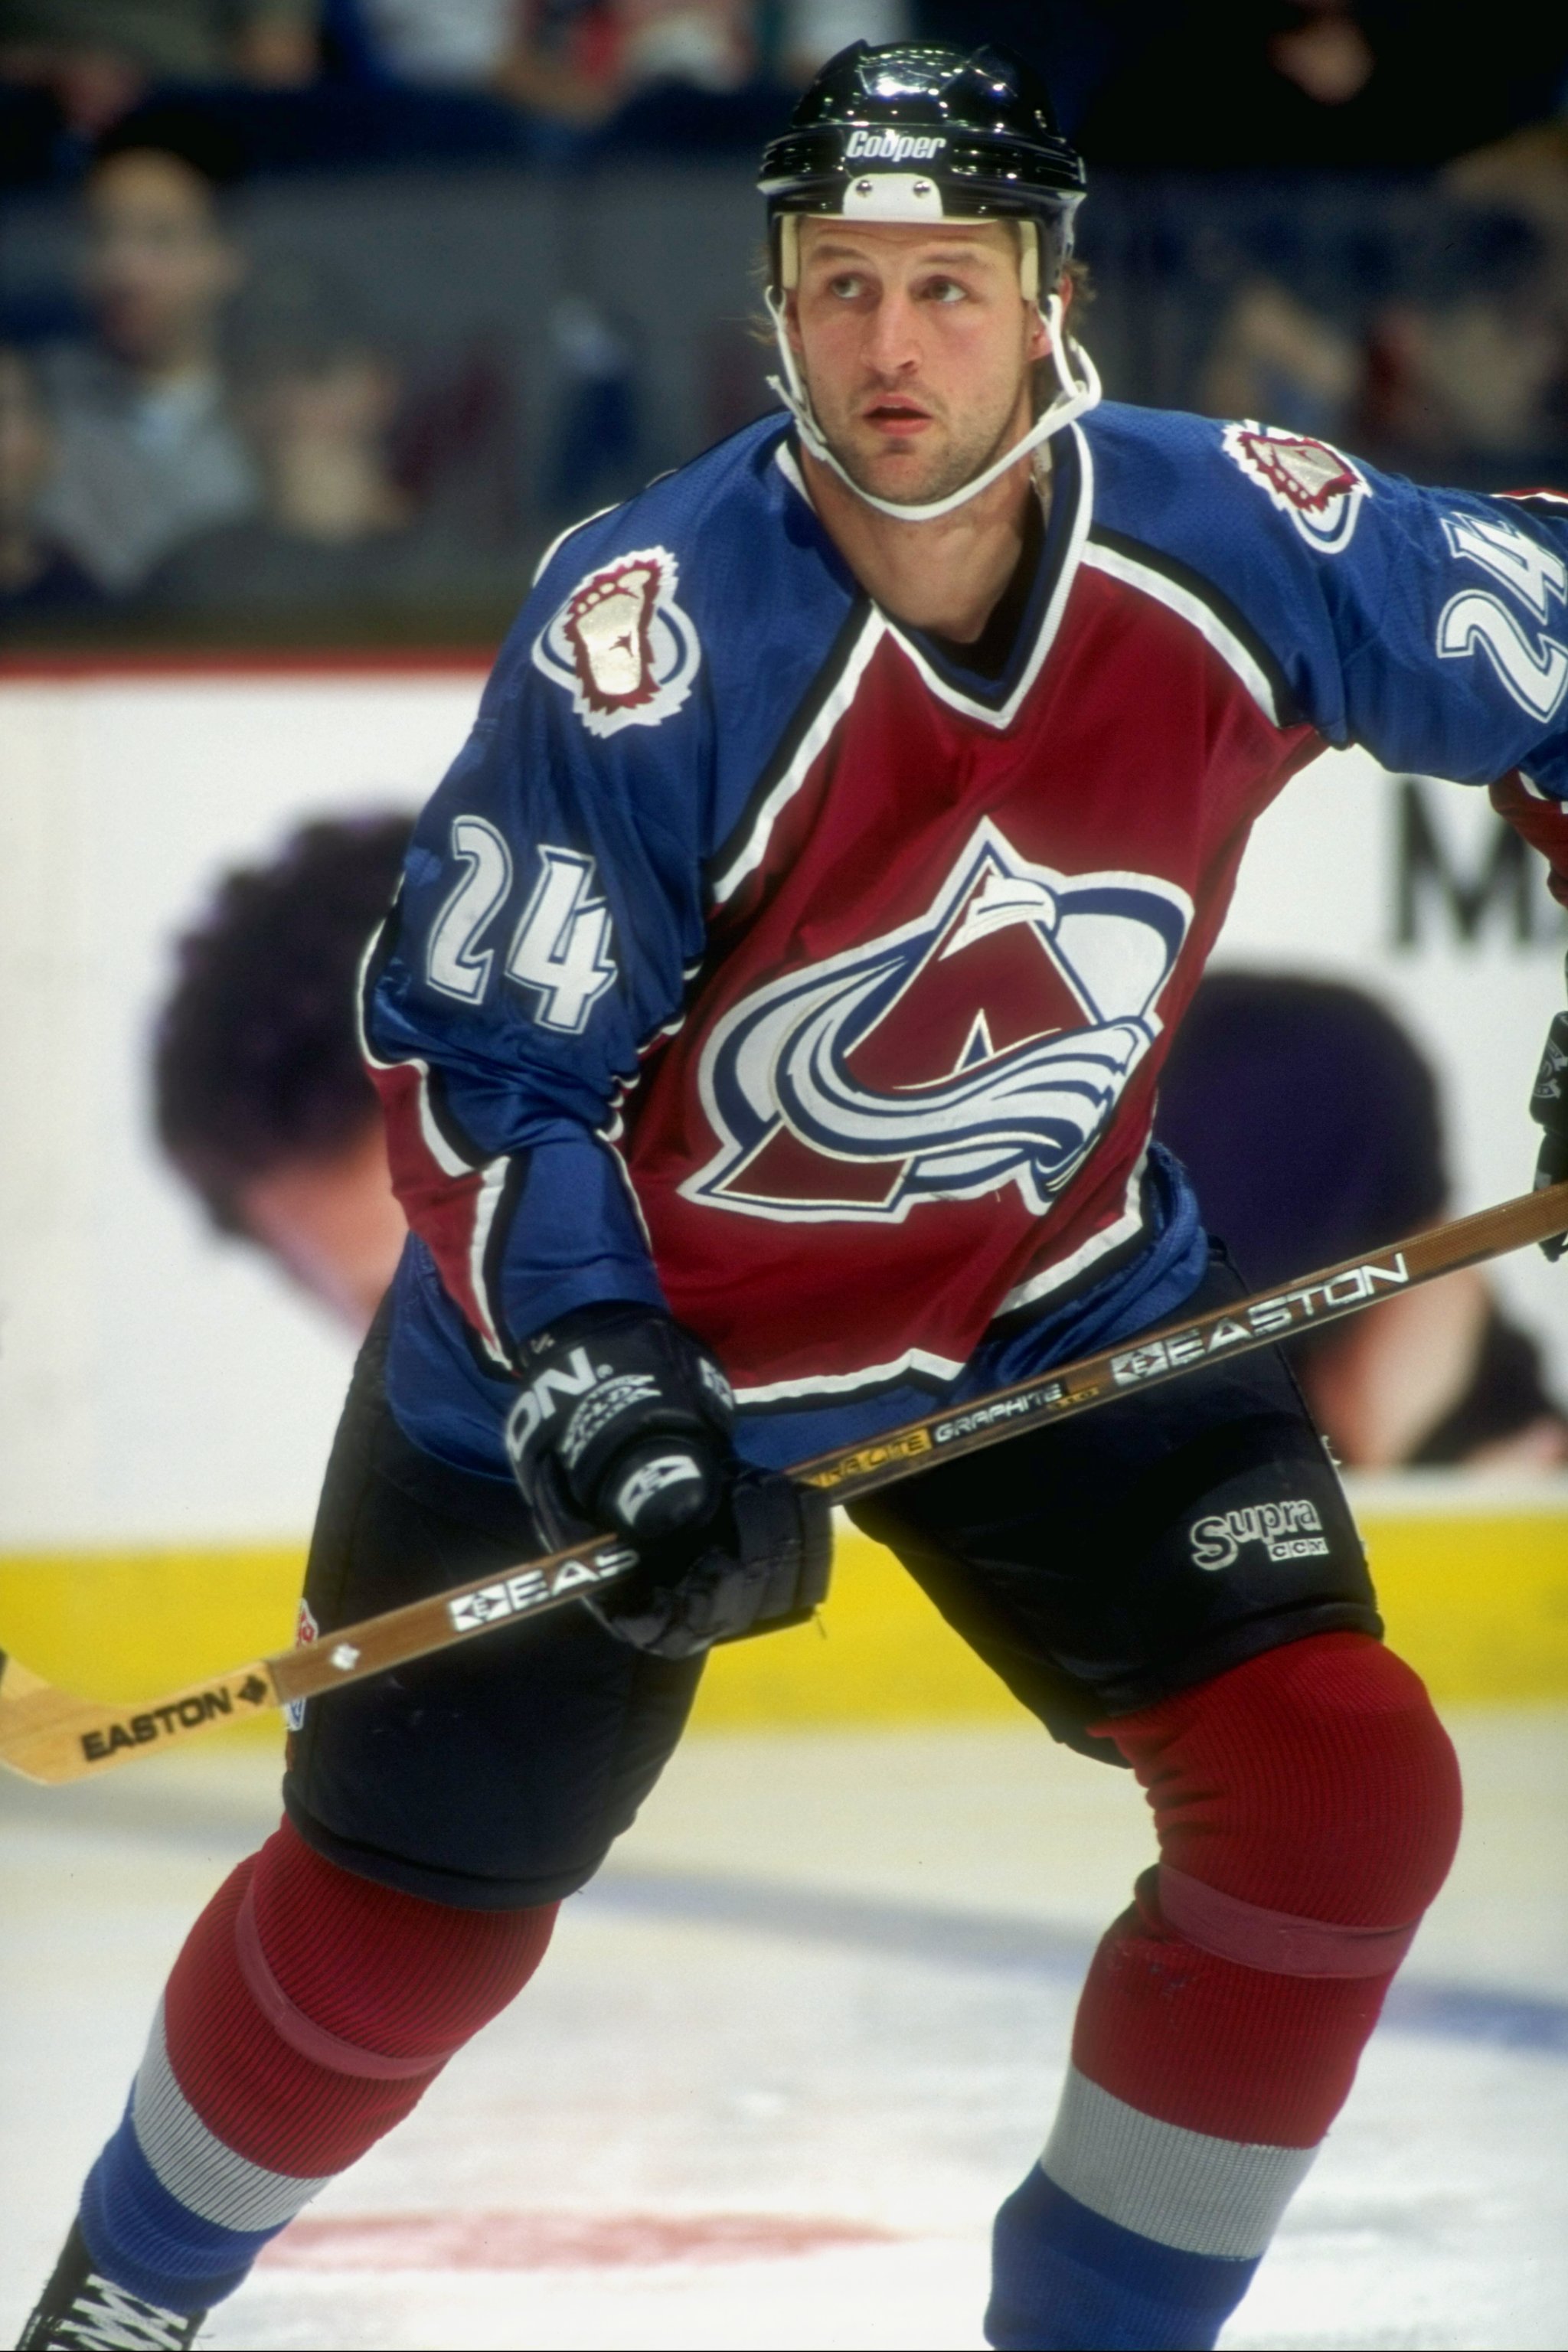 Colorado Avalanche Great Peter Forsberg: 3 Fun Facts